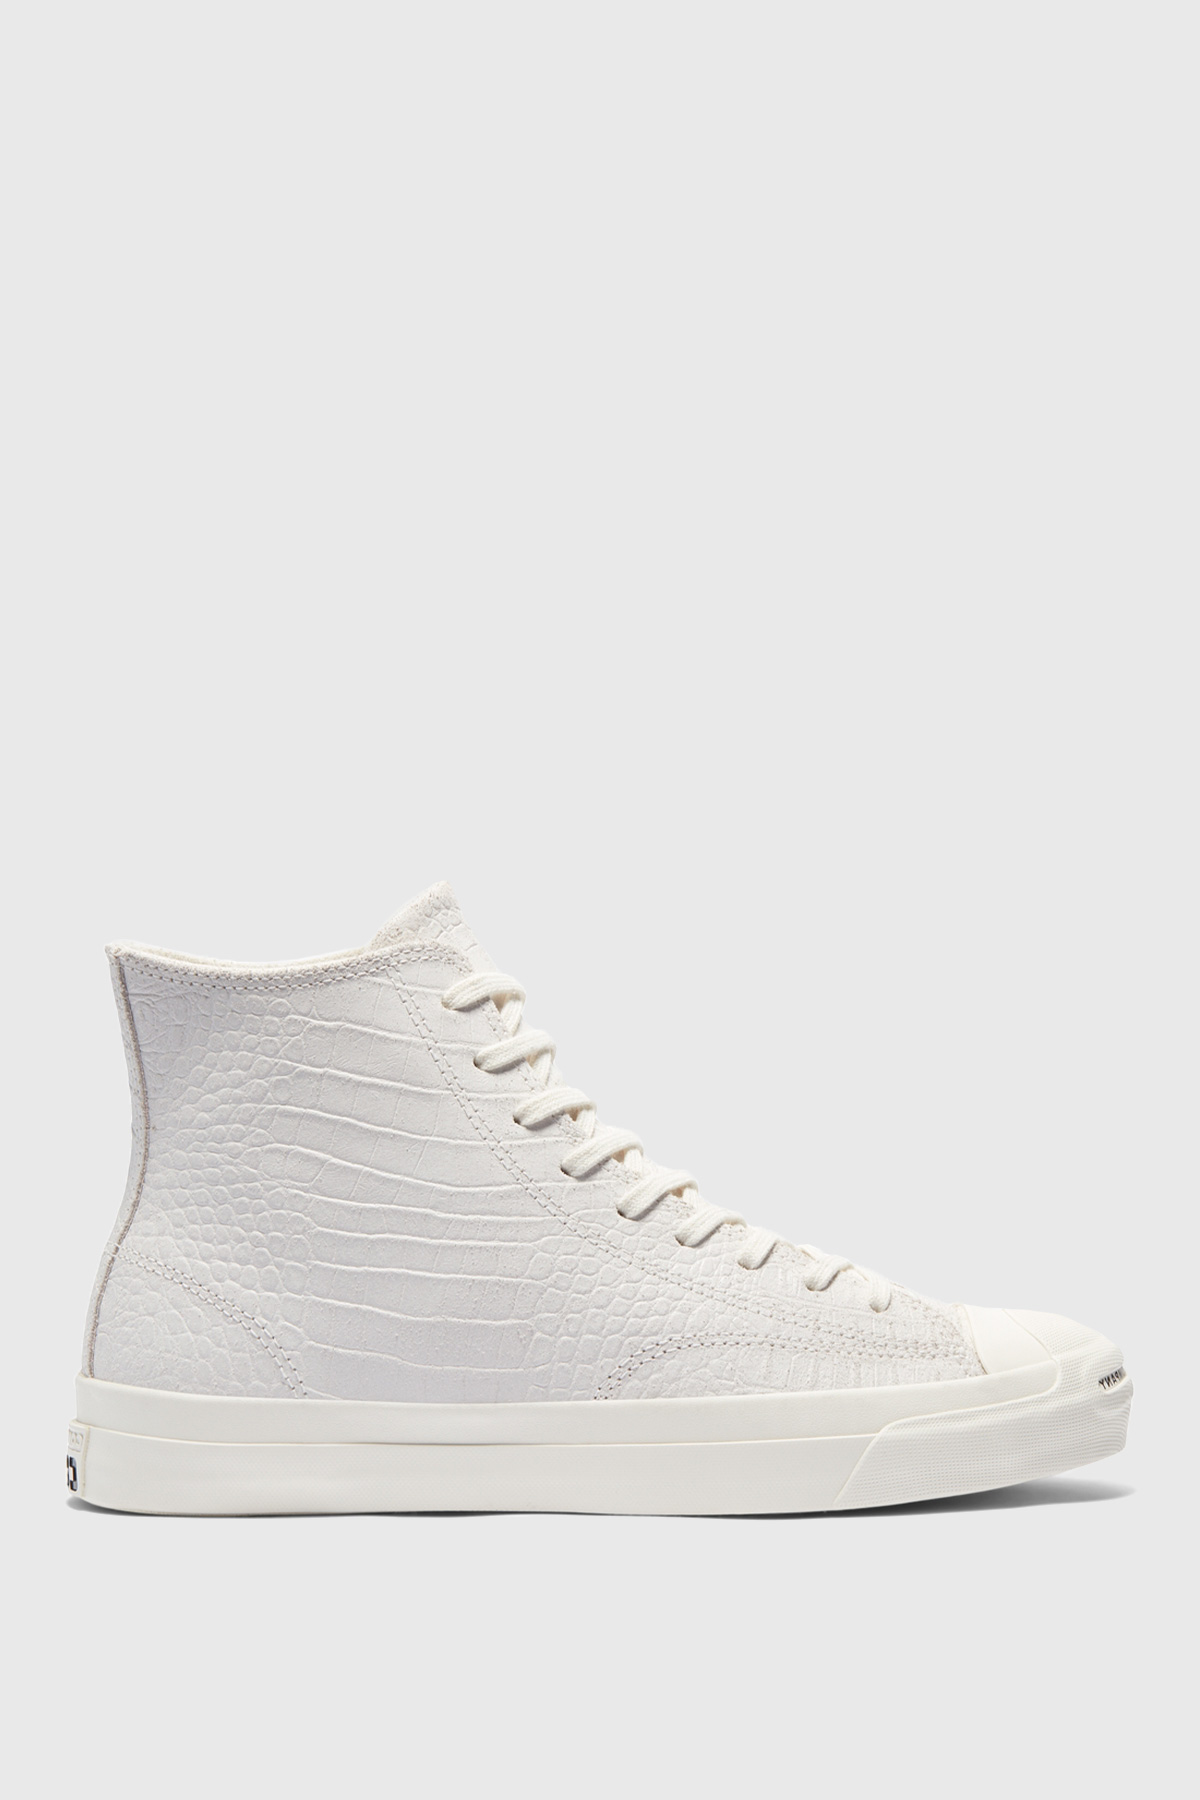 jack purcell pro